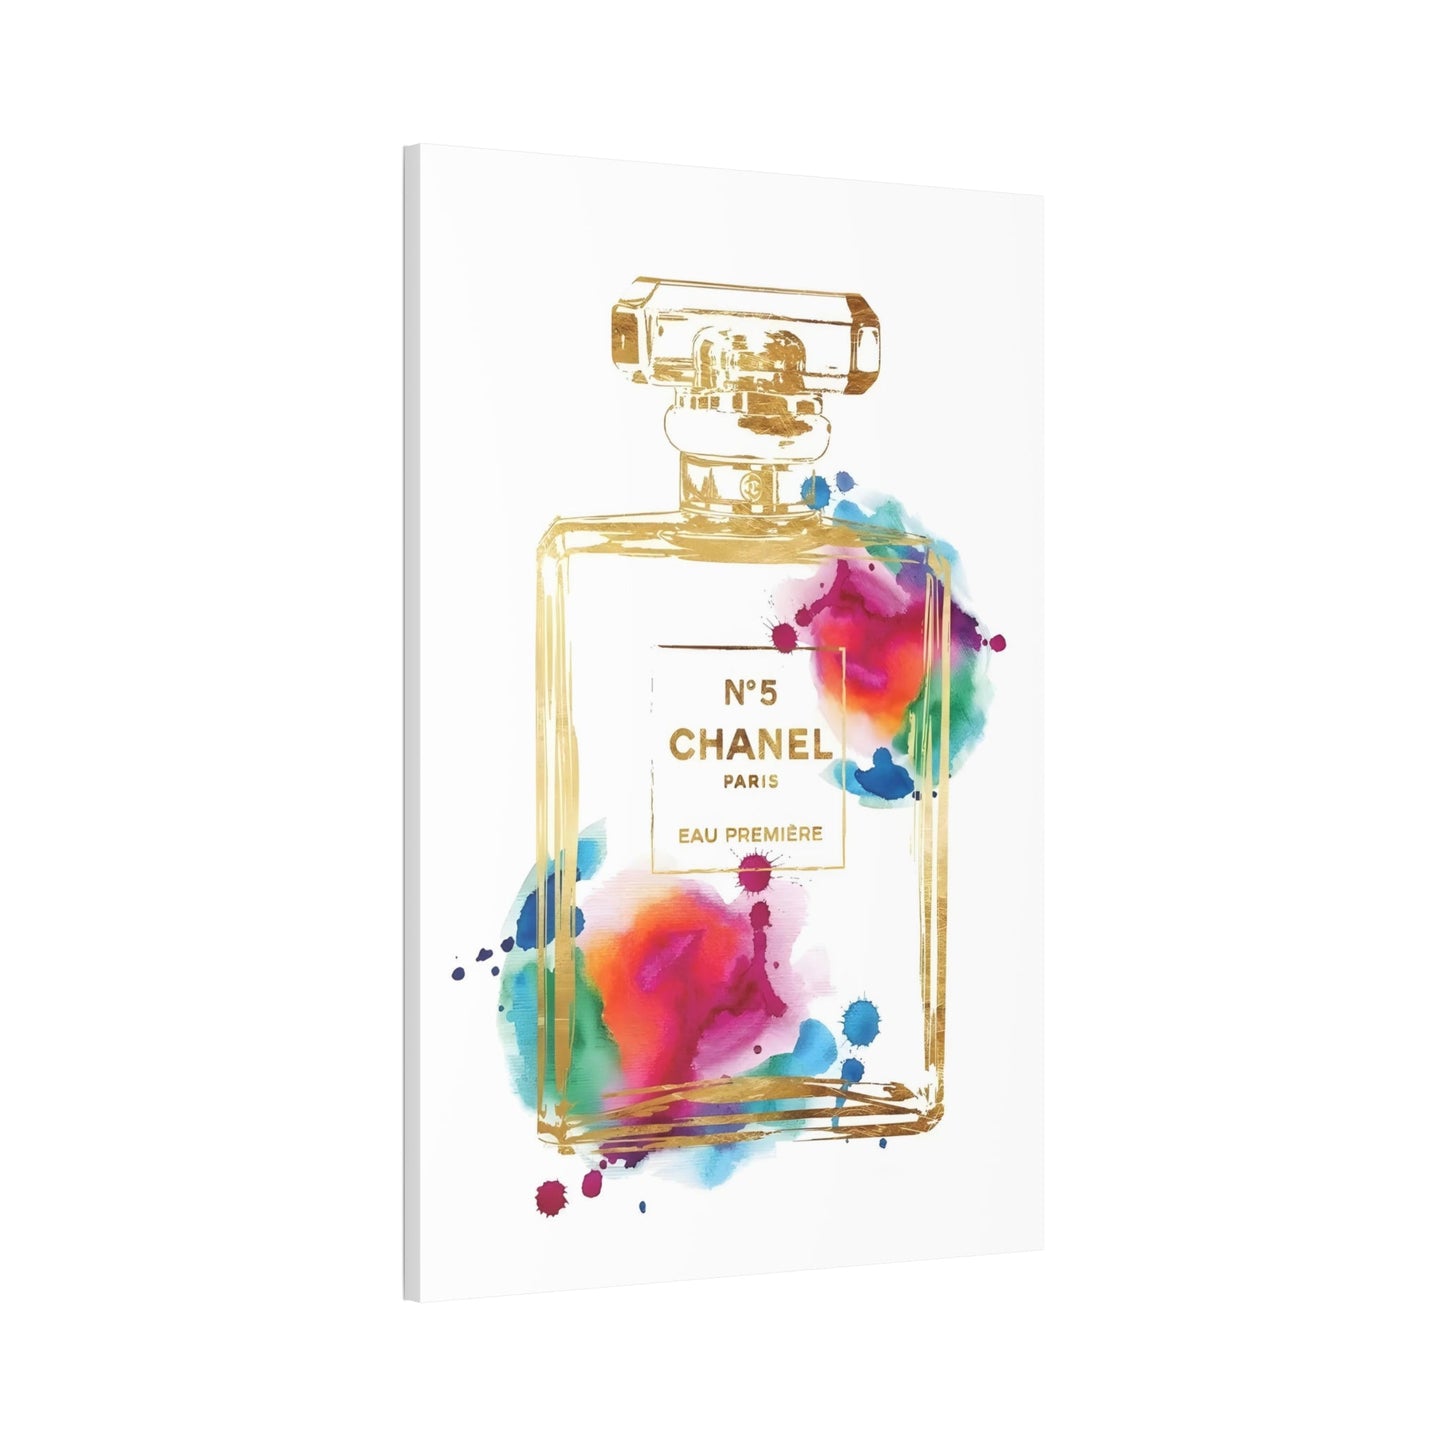 Iconic Beauty: Chanel-Inspired Print on Natural Canvas & Poster